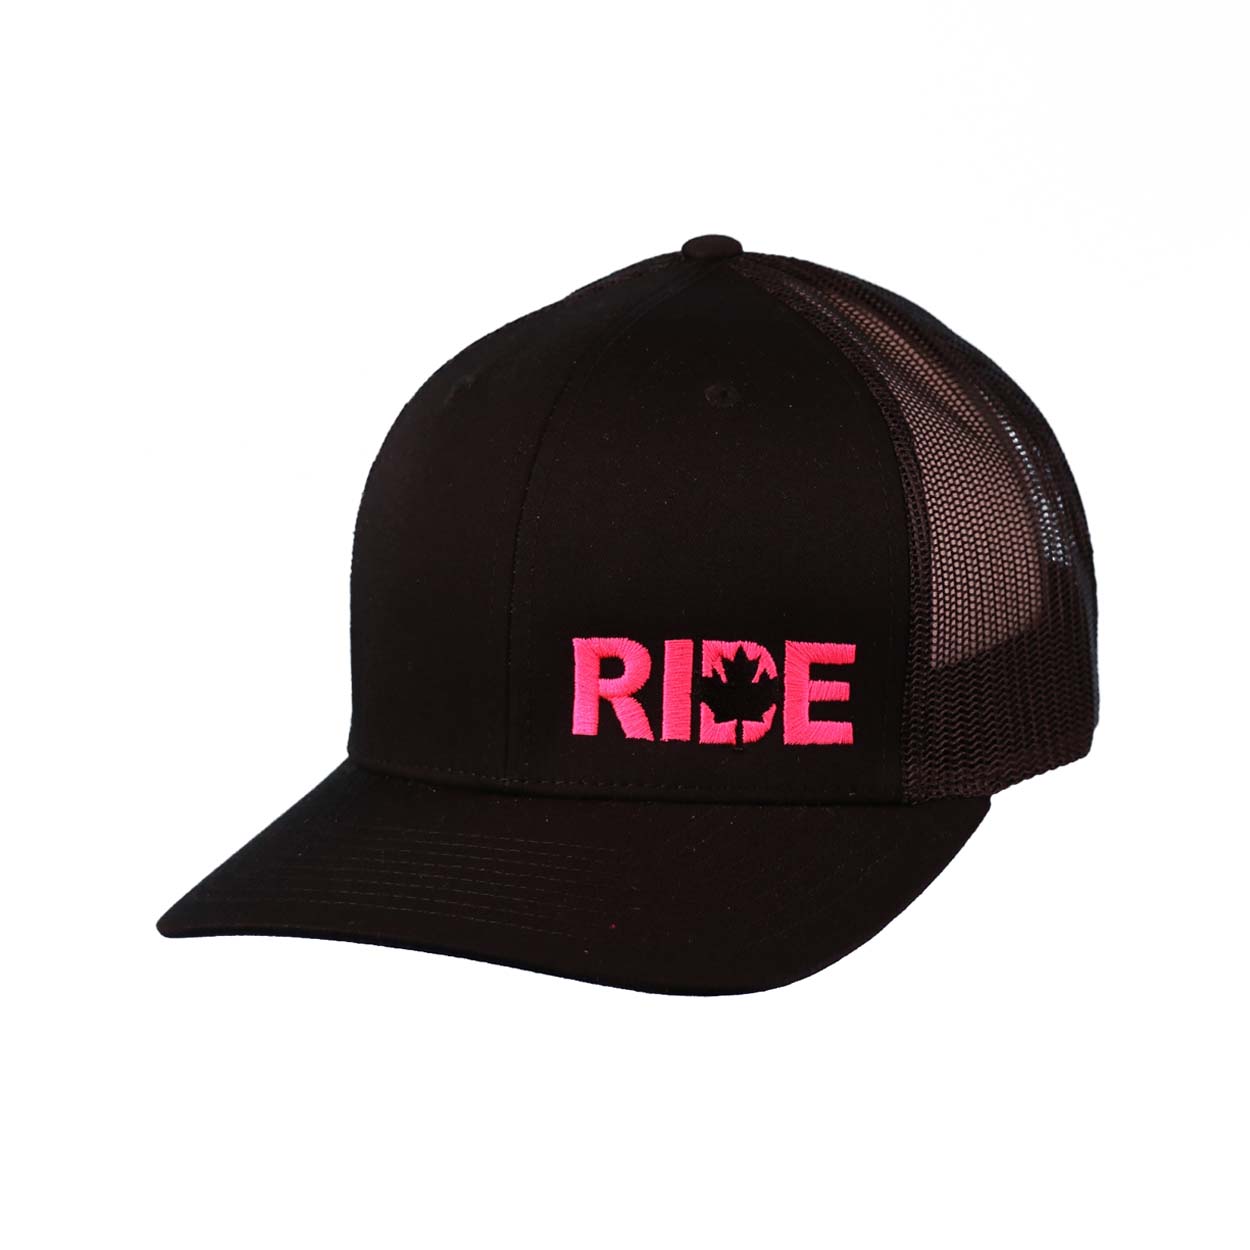 Ride Canada Night Out Pro Embroidered Snapback Trucker Hat Black/Pink